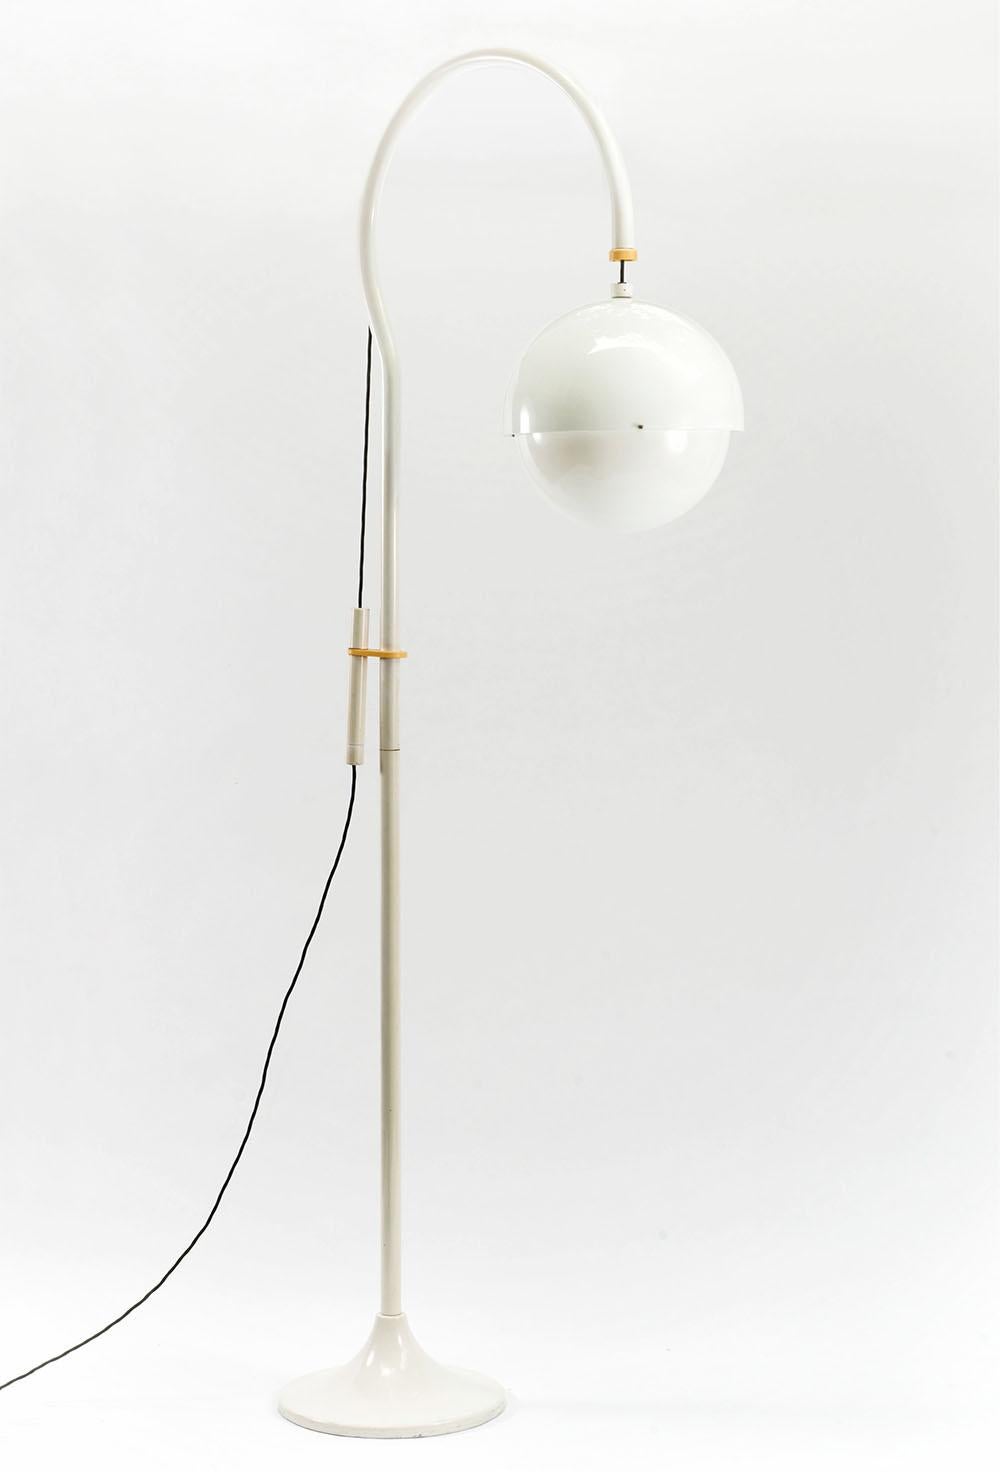 Rare floor lamp design Luigi Bandini Buti for Kartell 1965.
Painted tubular metal structure, plexiglass double hemisphere diffuser.
Mechanism with weight and up and down for adjustment.
Original electrical system.
In excellent conditions.